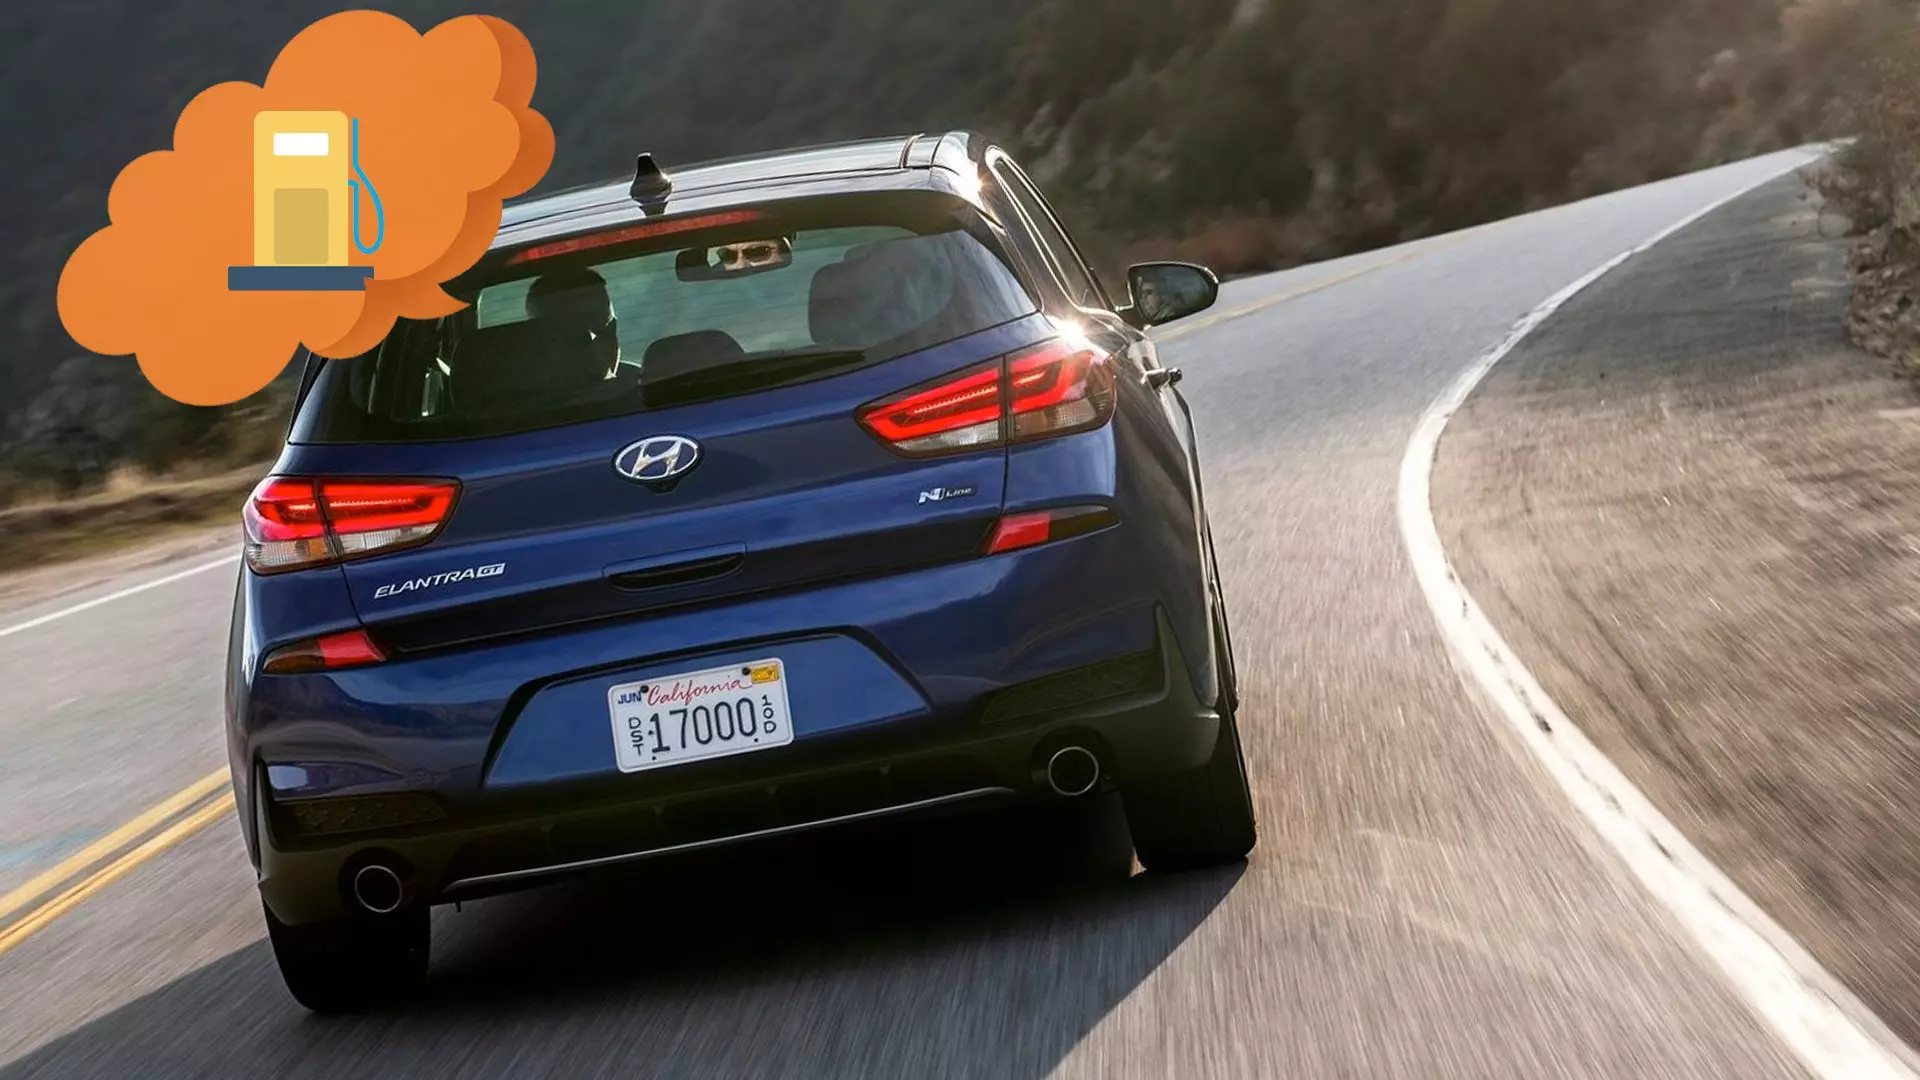 The Hyundai Elantra GT Has the Fuel Economy of a Light Truck for Some Reason